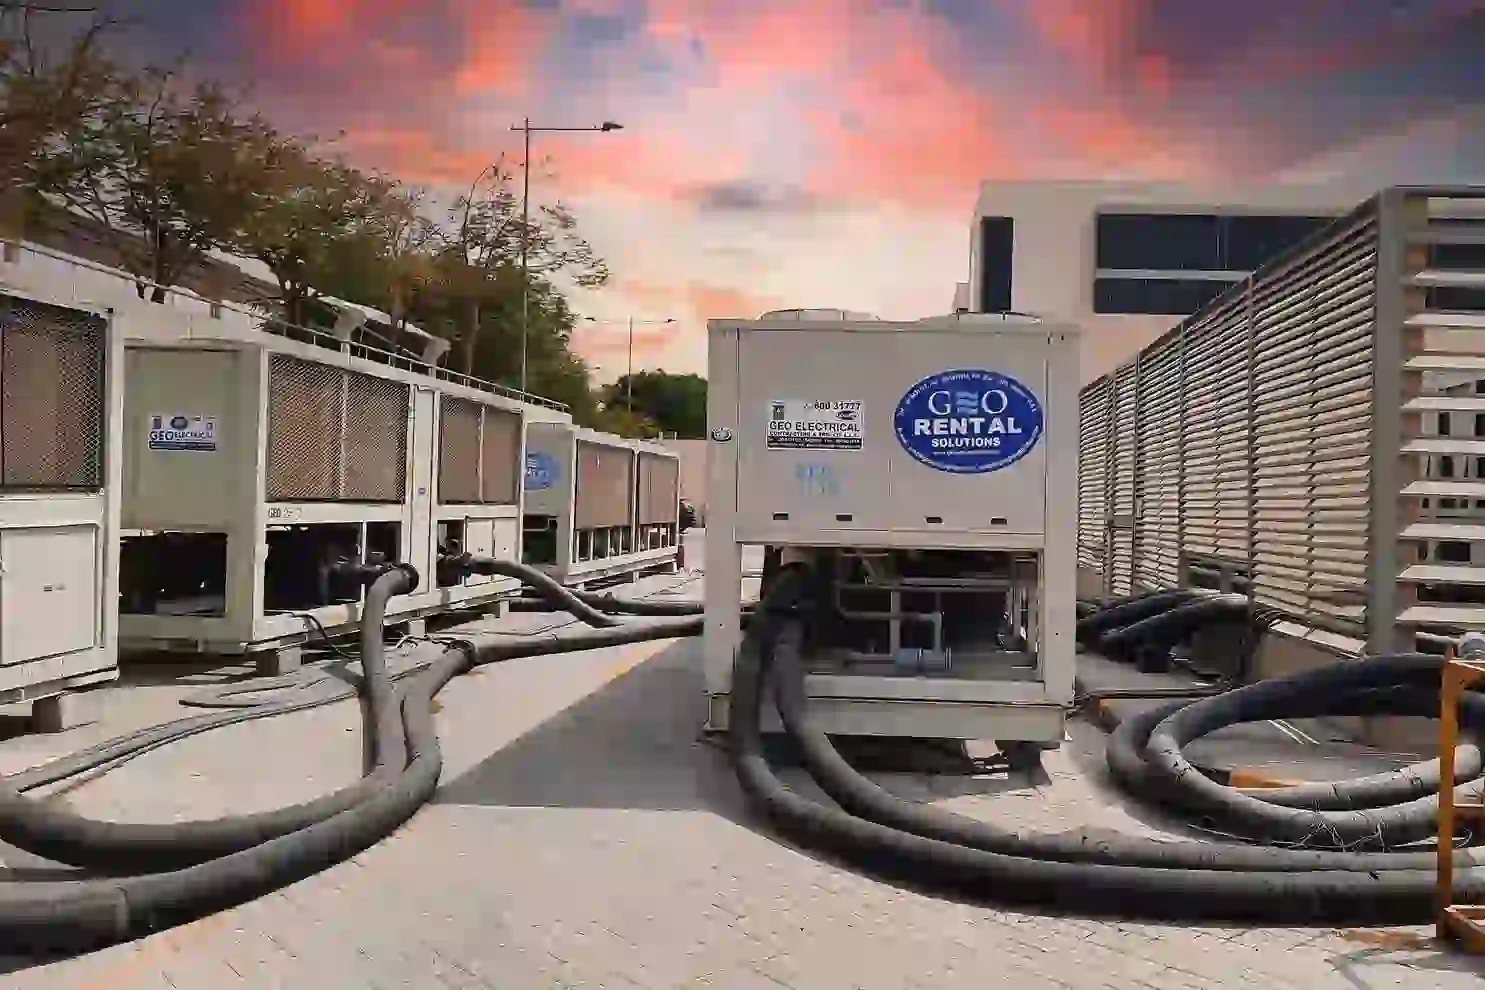 Rental Site, Air cooled chiller connected with heavy duty hose, Geo Rental Solutions